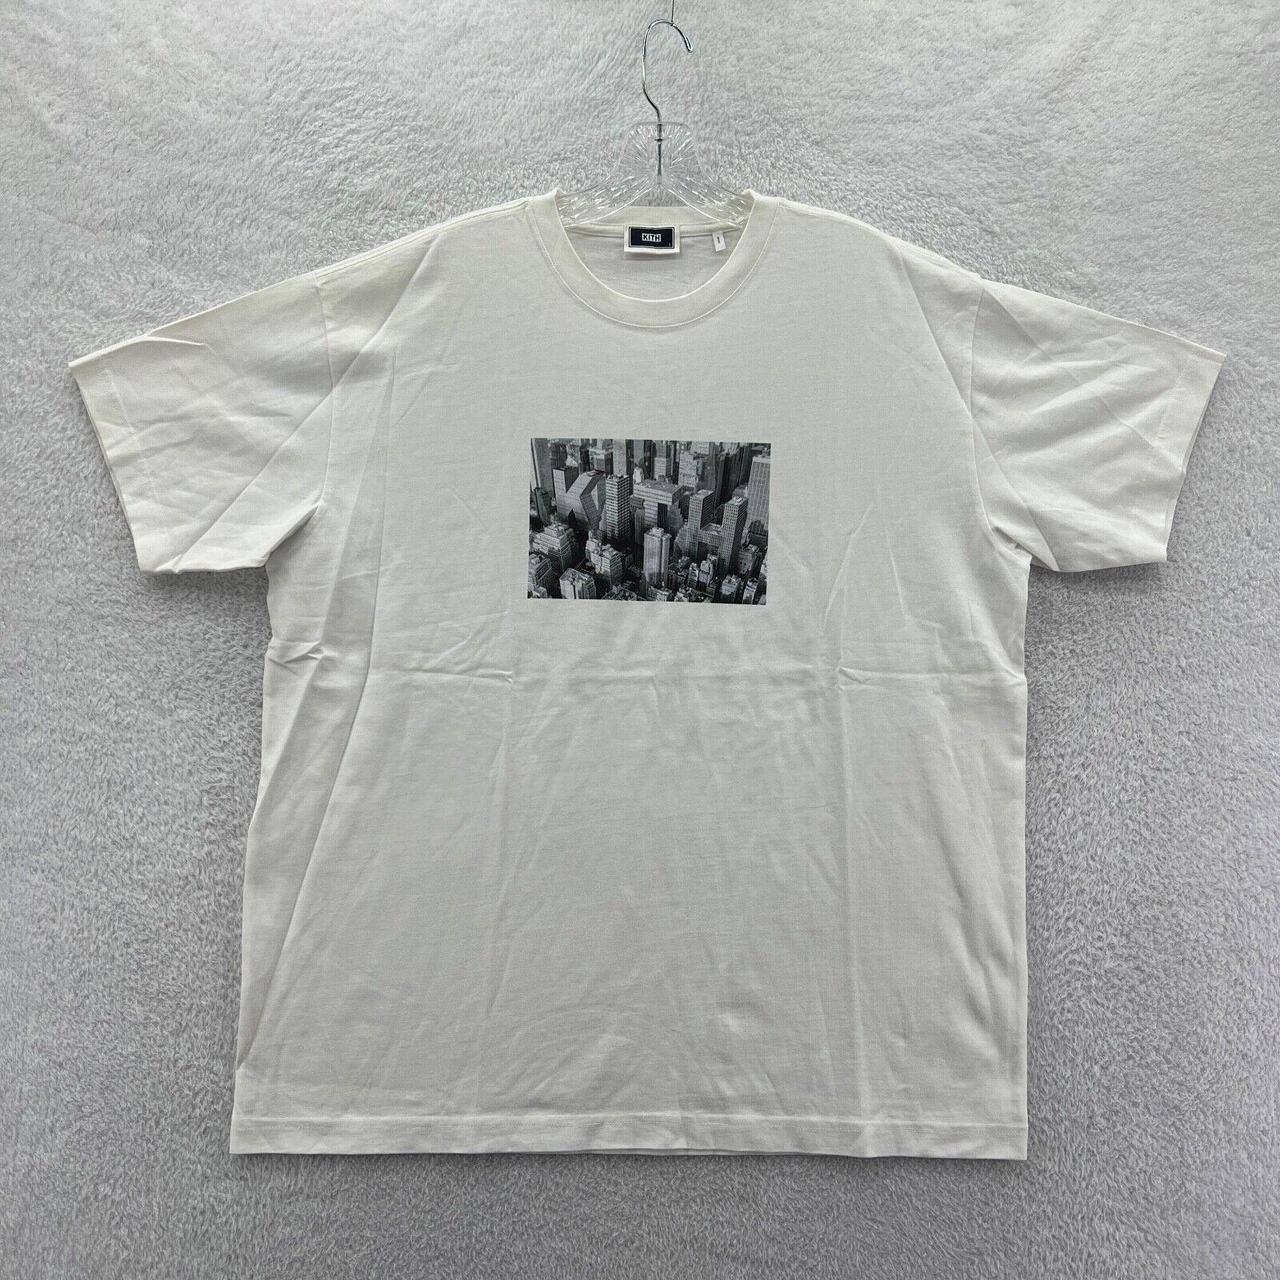 Up for sale is a New Kith HQ Building Vintage Tee - Depop